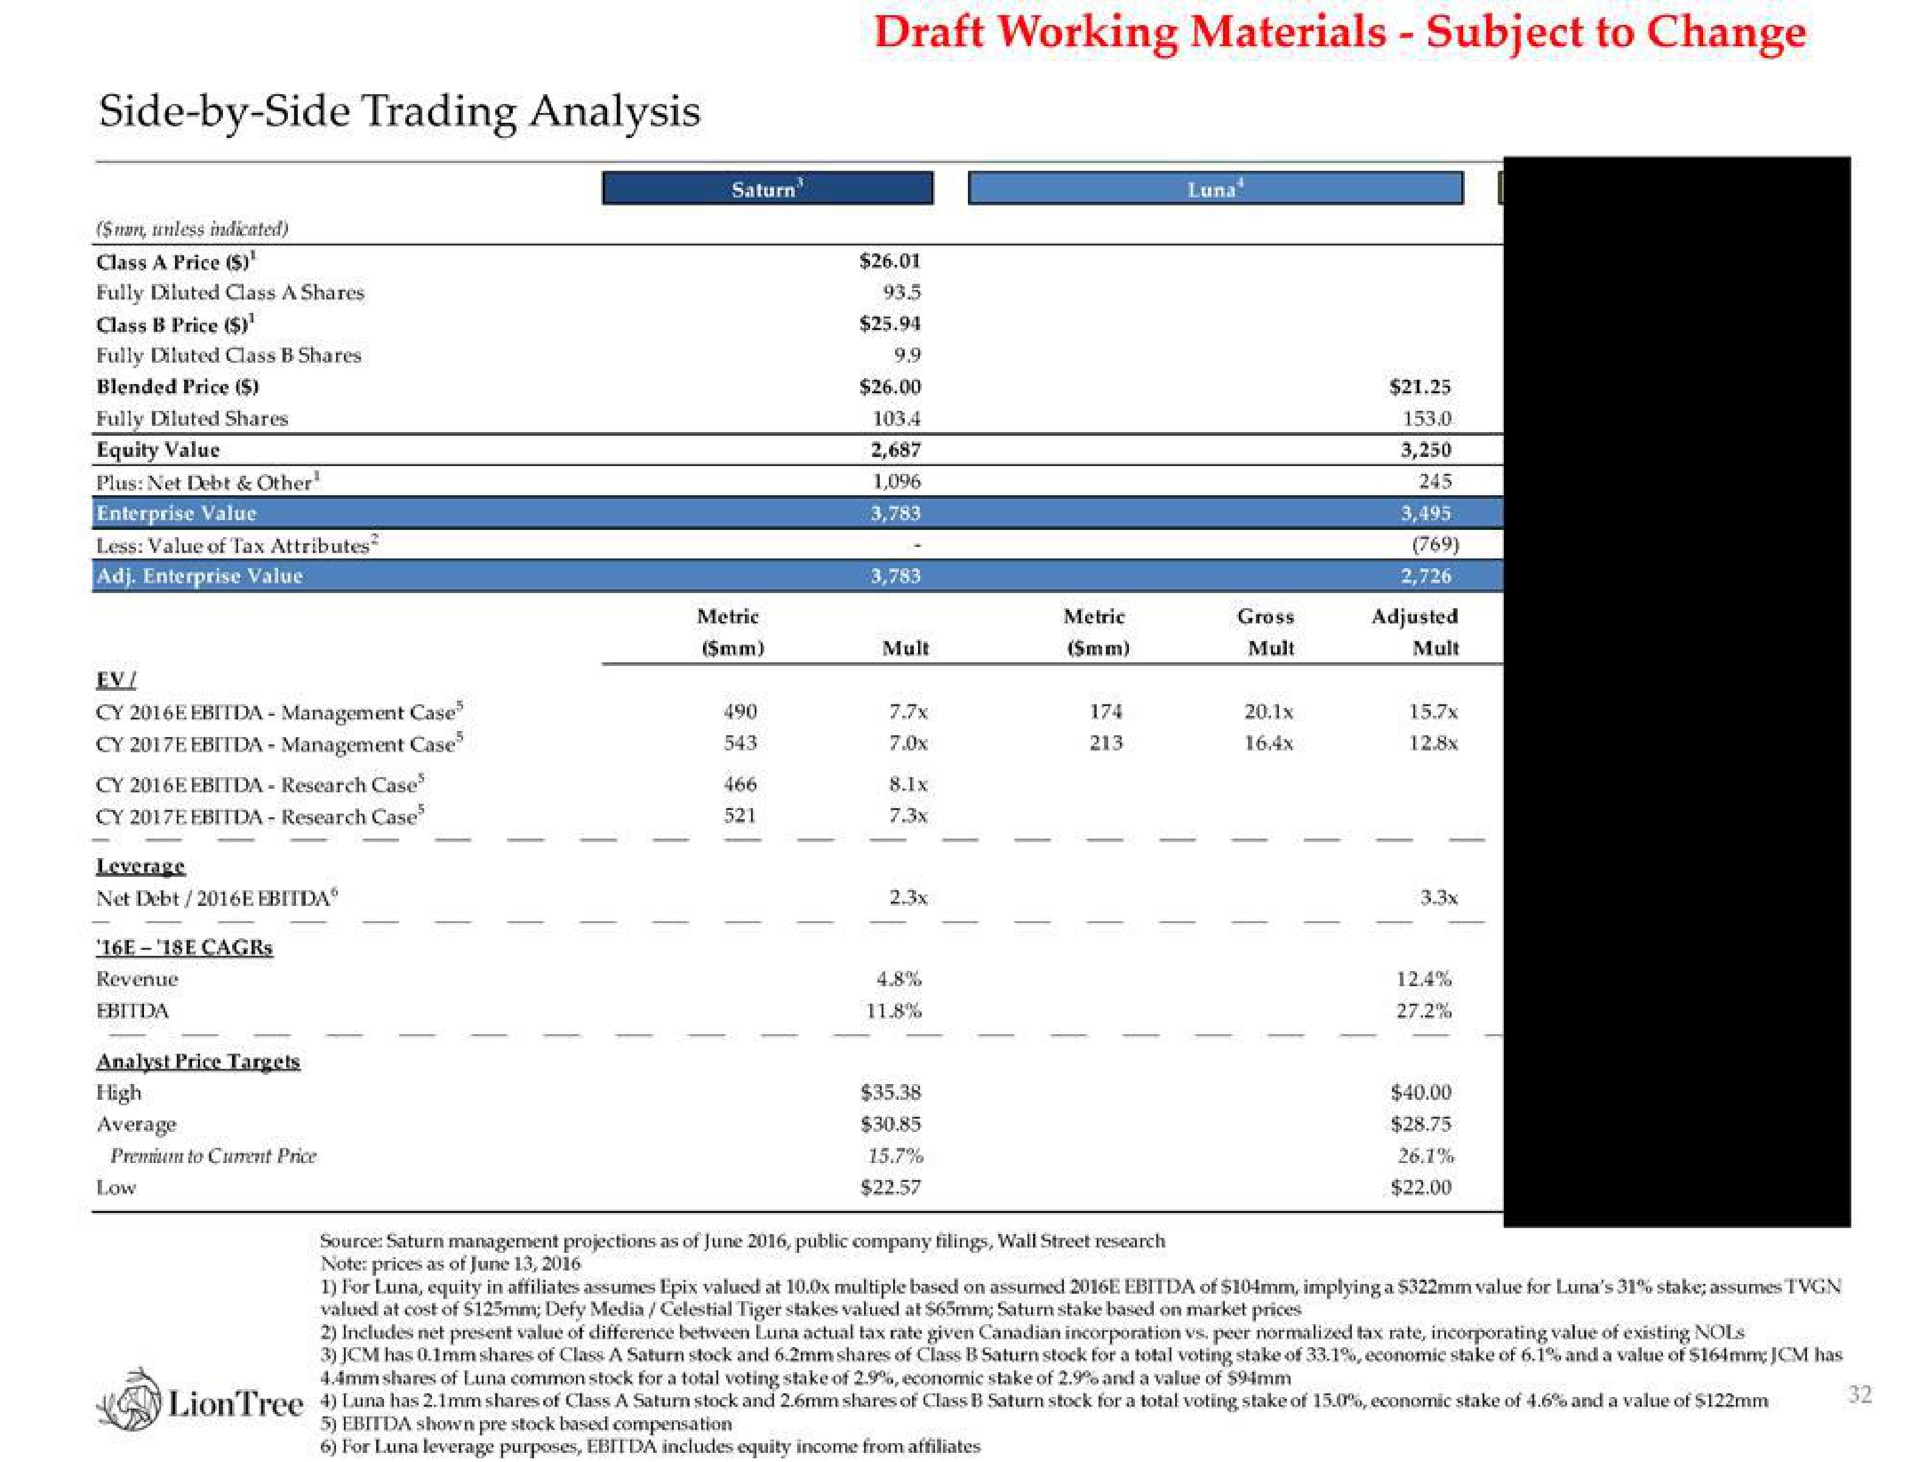 side by side trading analysis draft working materials subject to change | LionTree